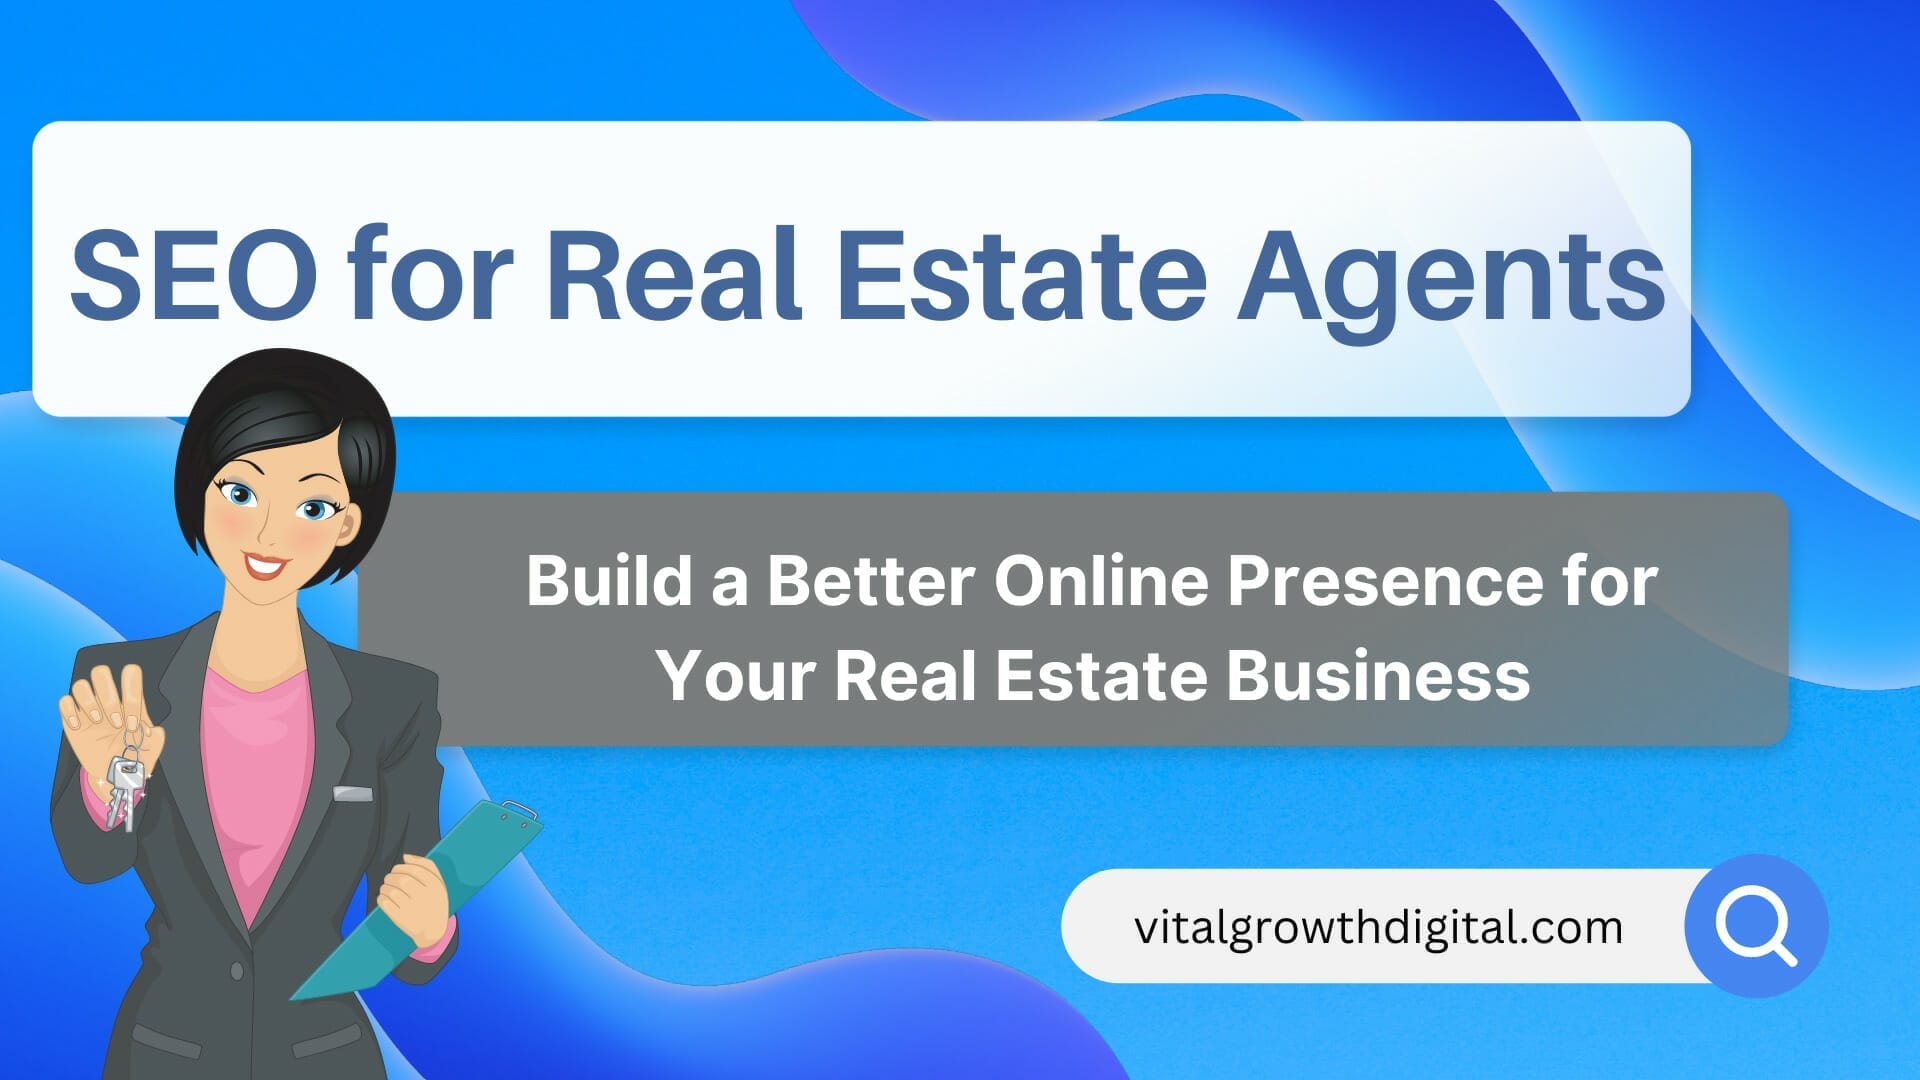 SEO for real estate agents guide